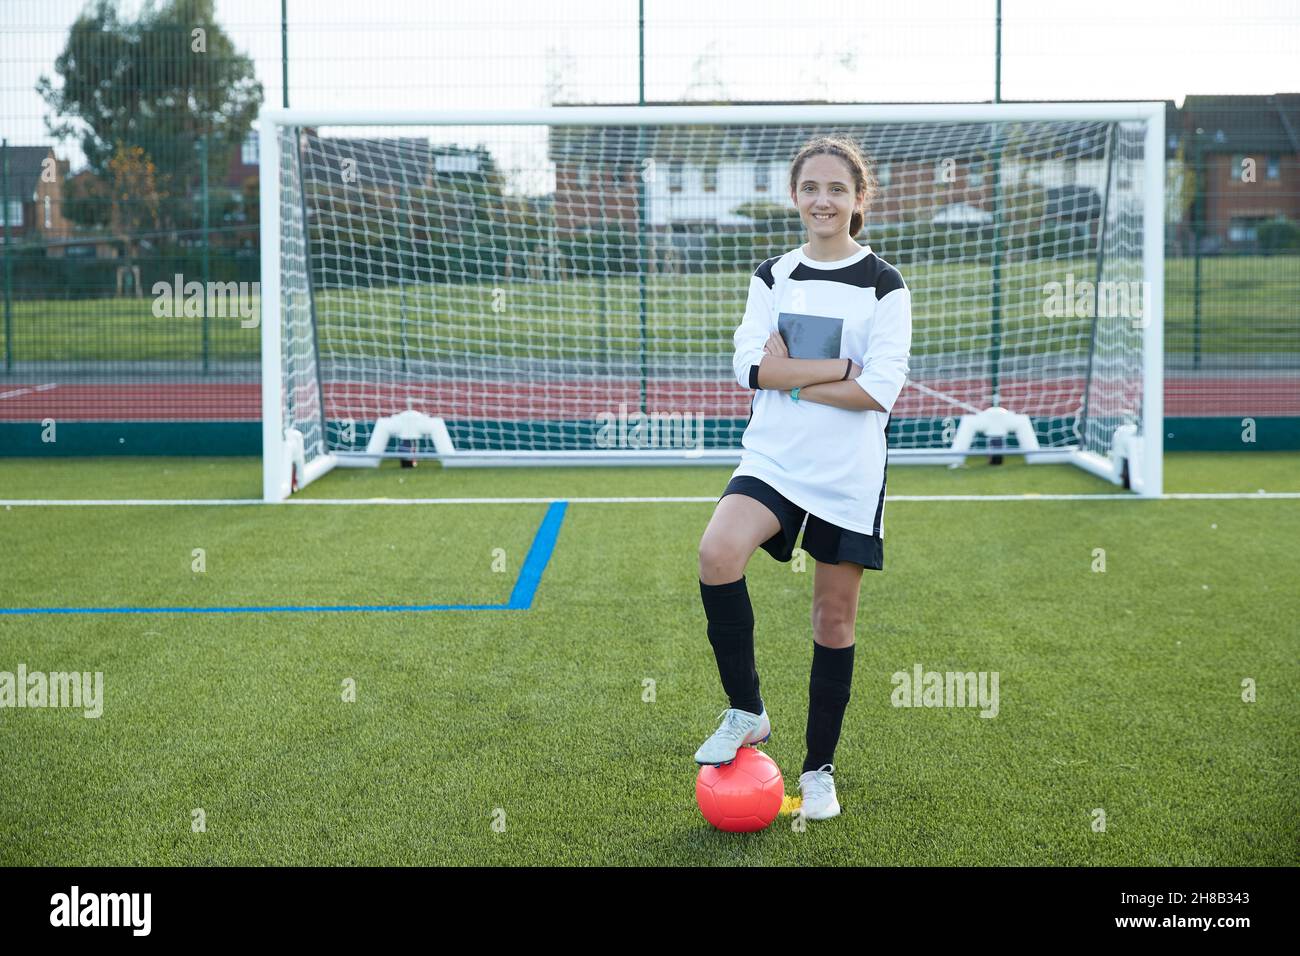 UK, Portrait of smiling female soccer player (12-13) in front of goal Stock Photo